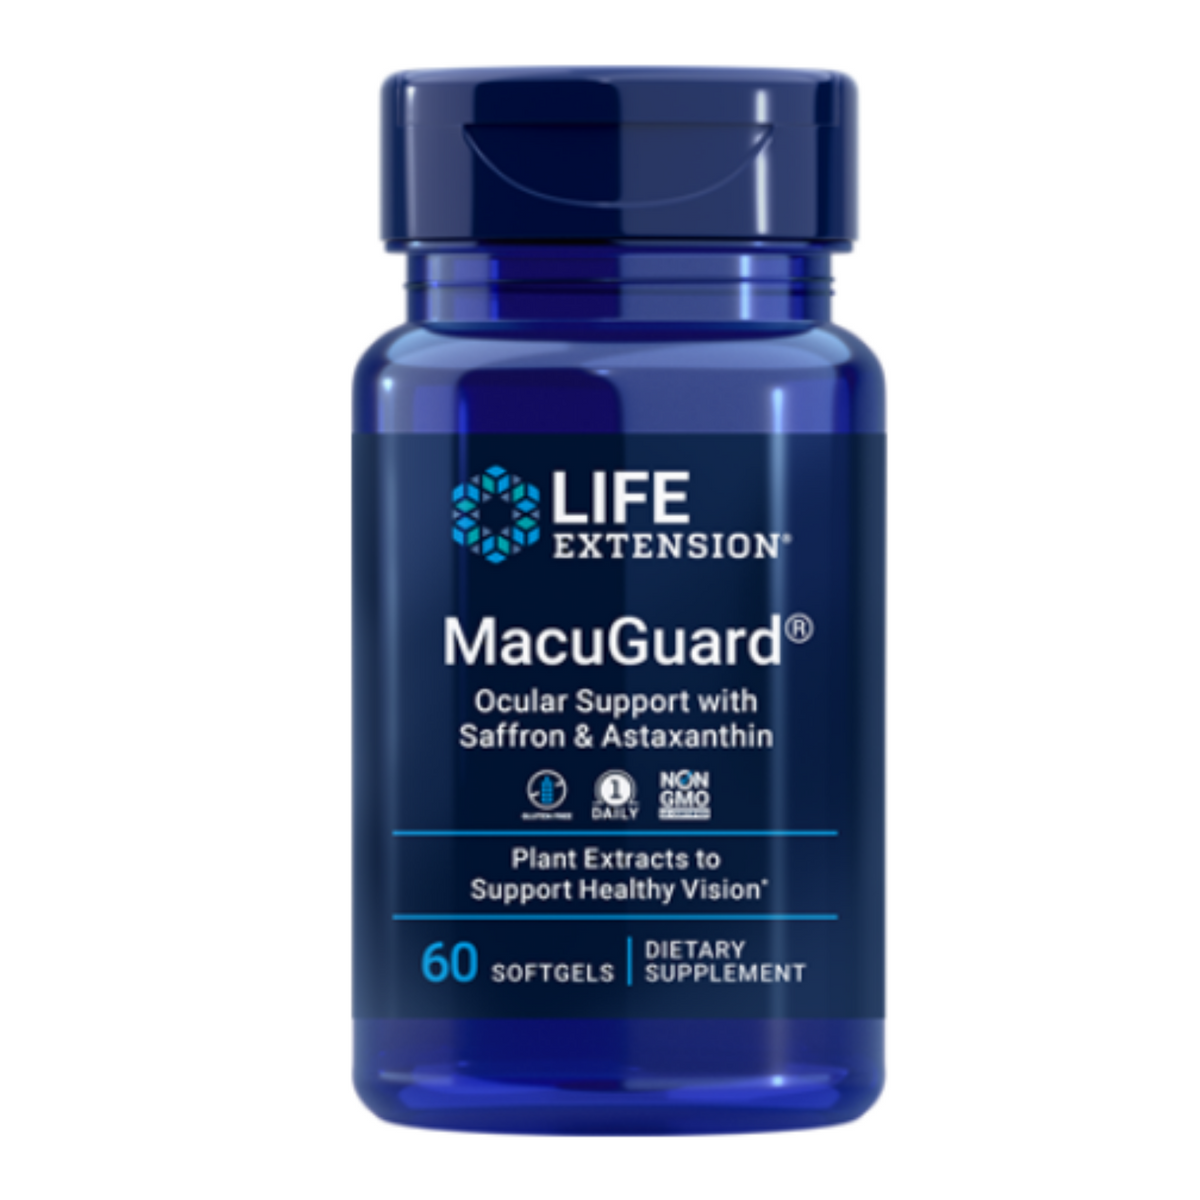 Primary image of MacuGuard